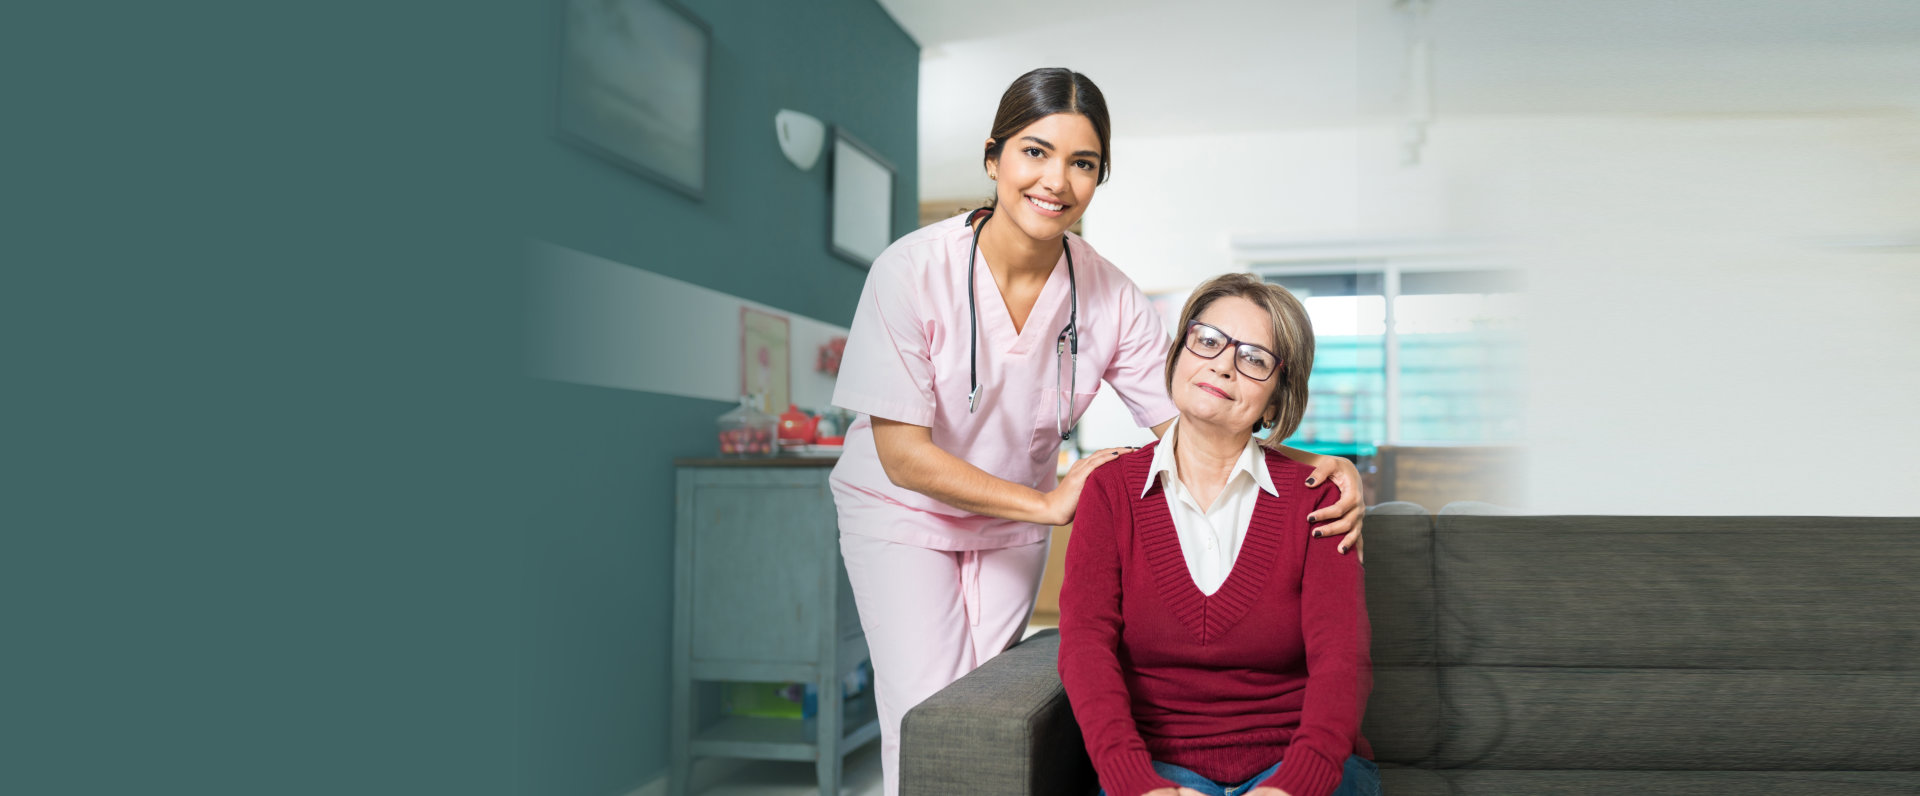 image of a nurse and her patient